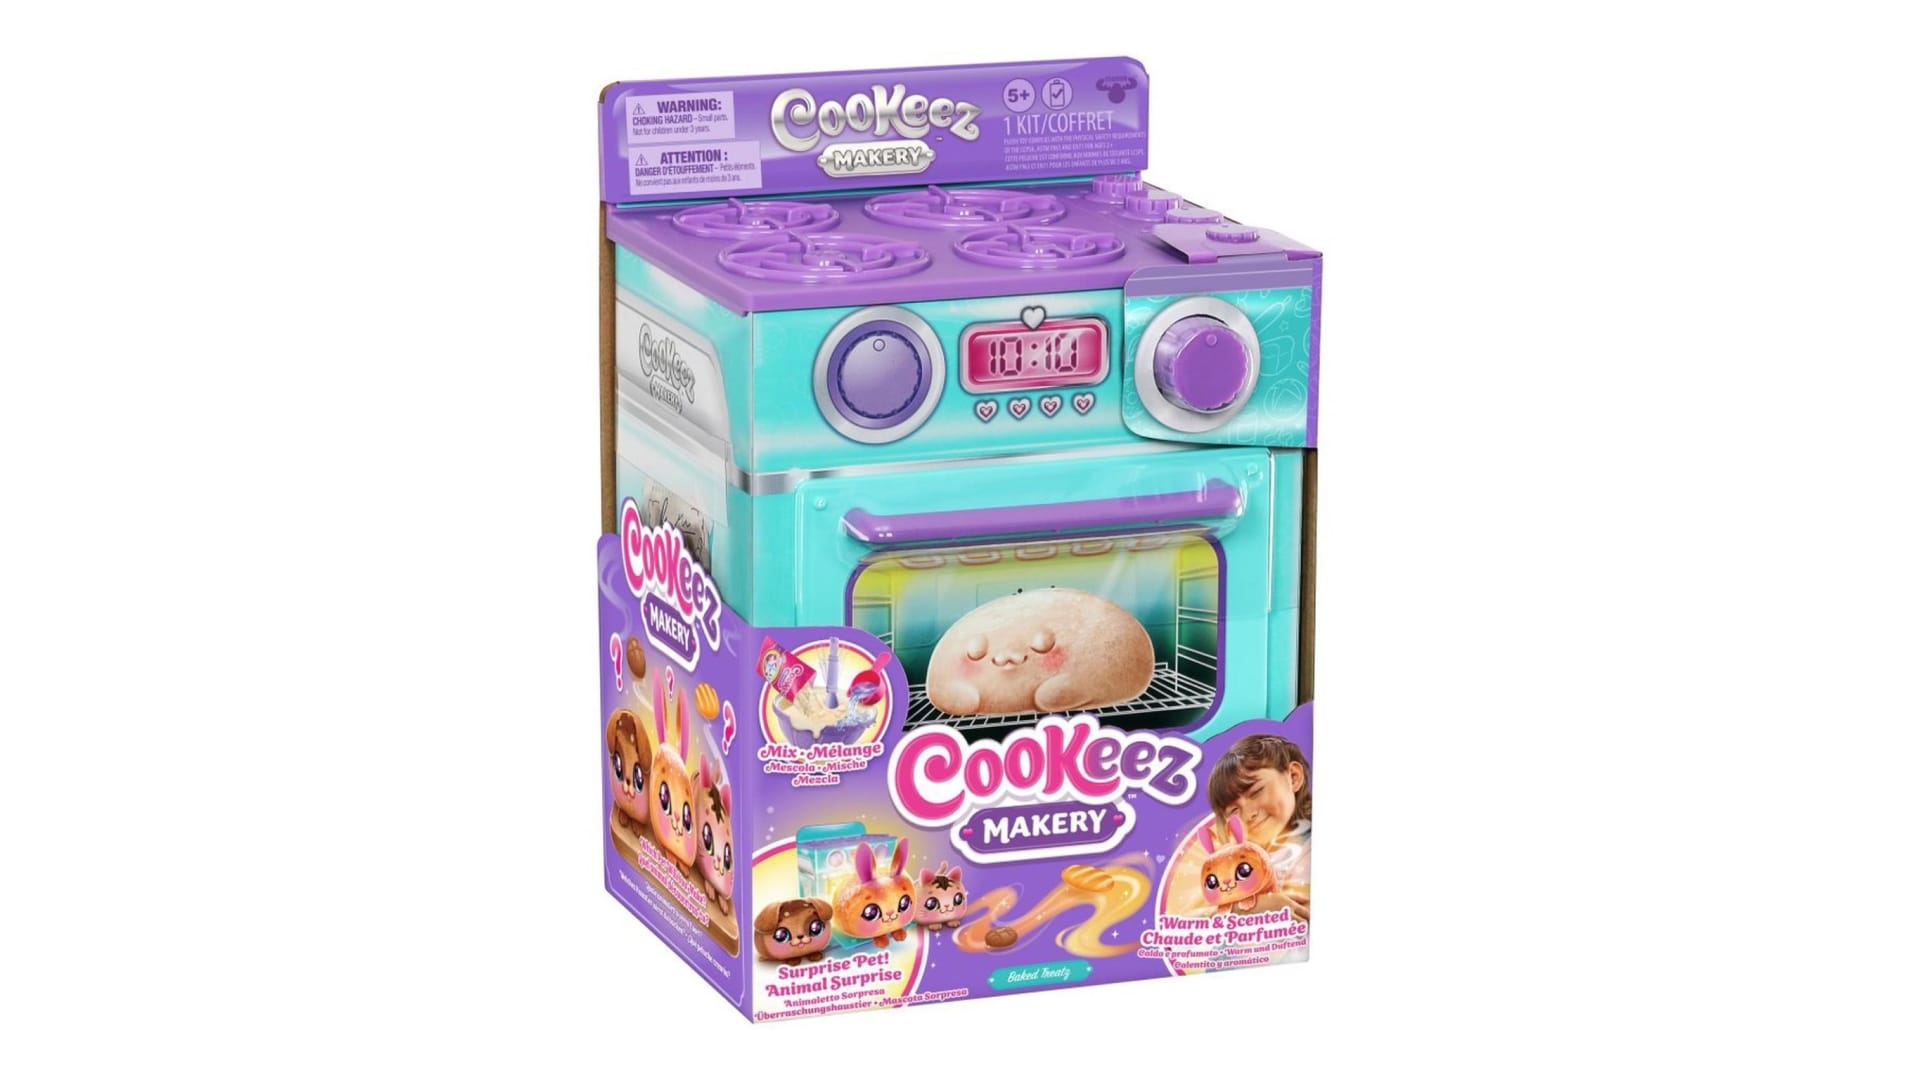 A Cookeez Makery Oven